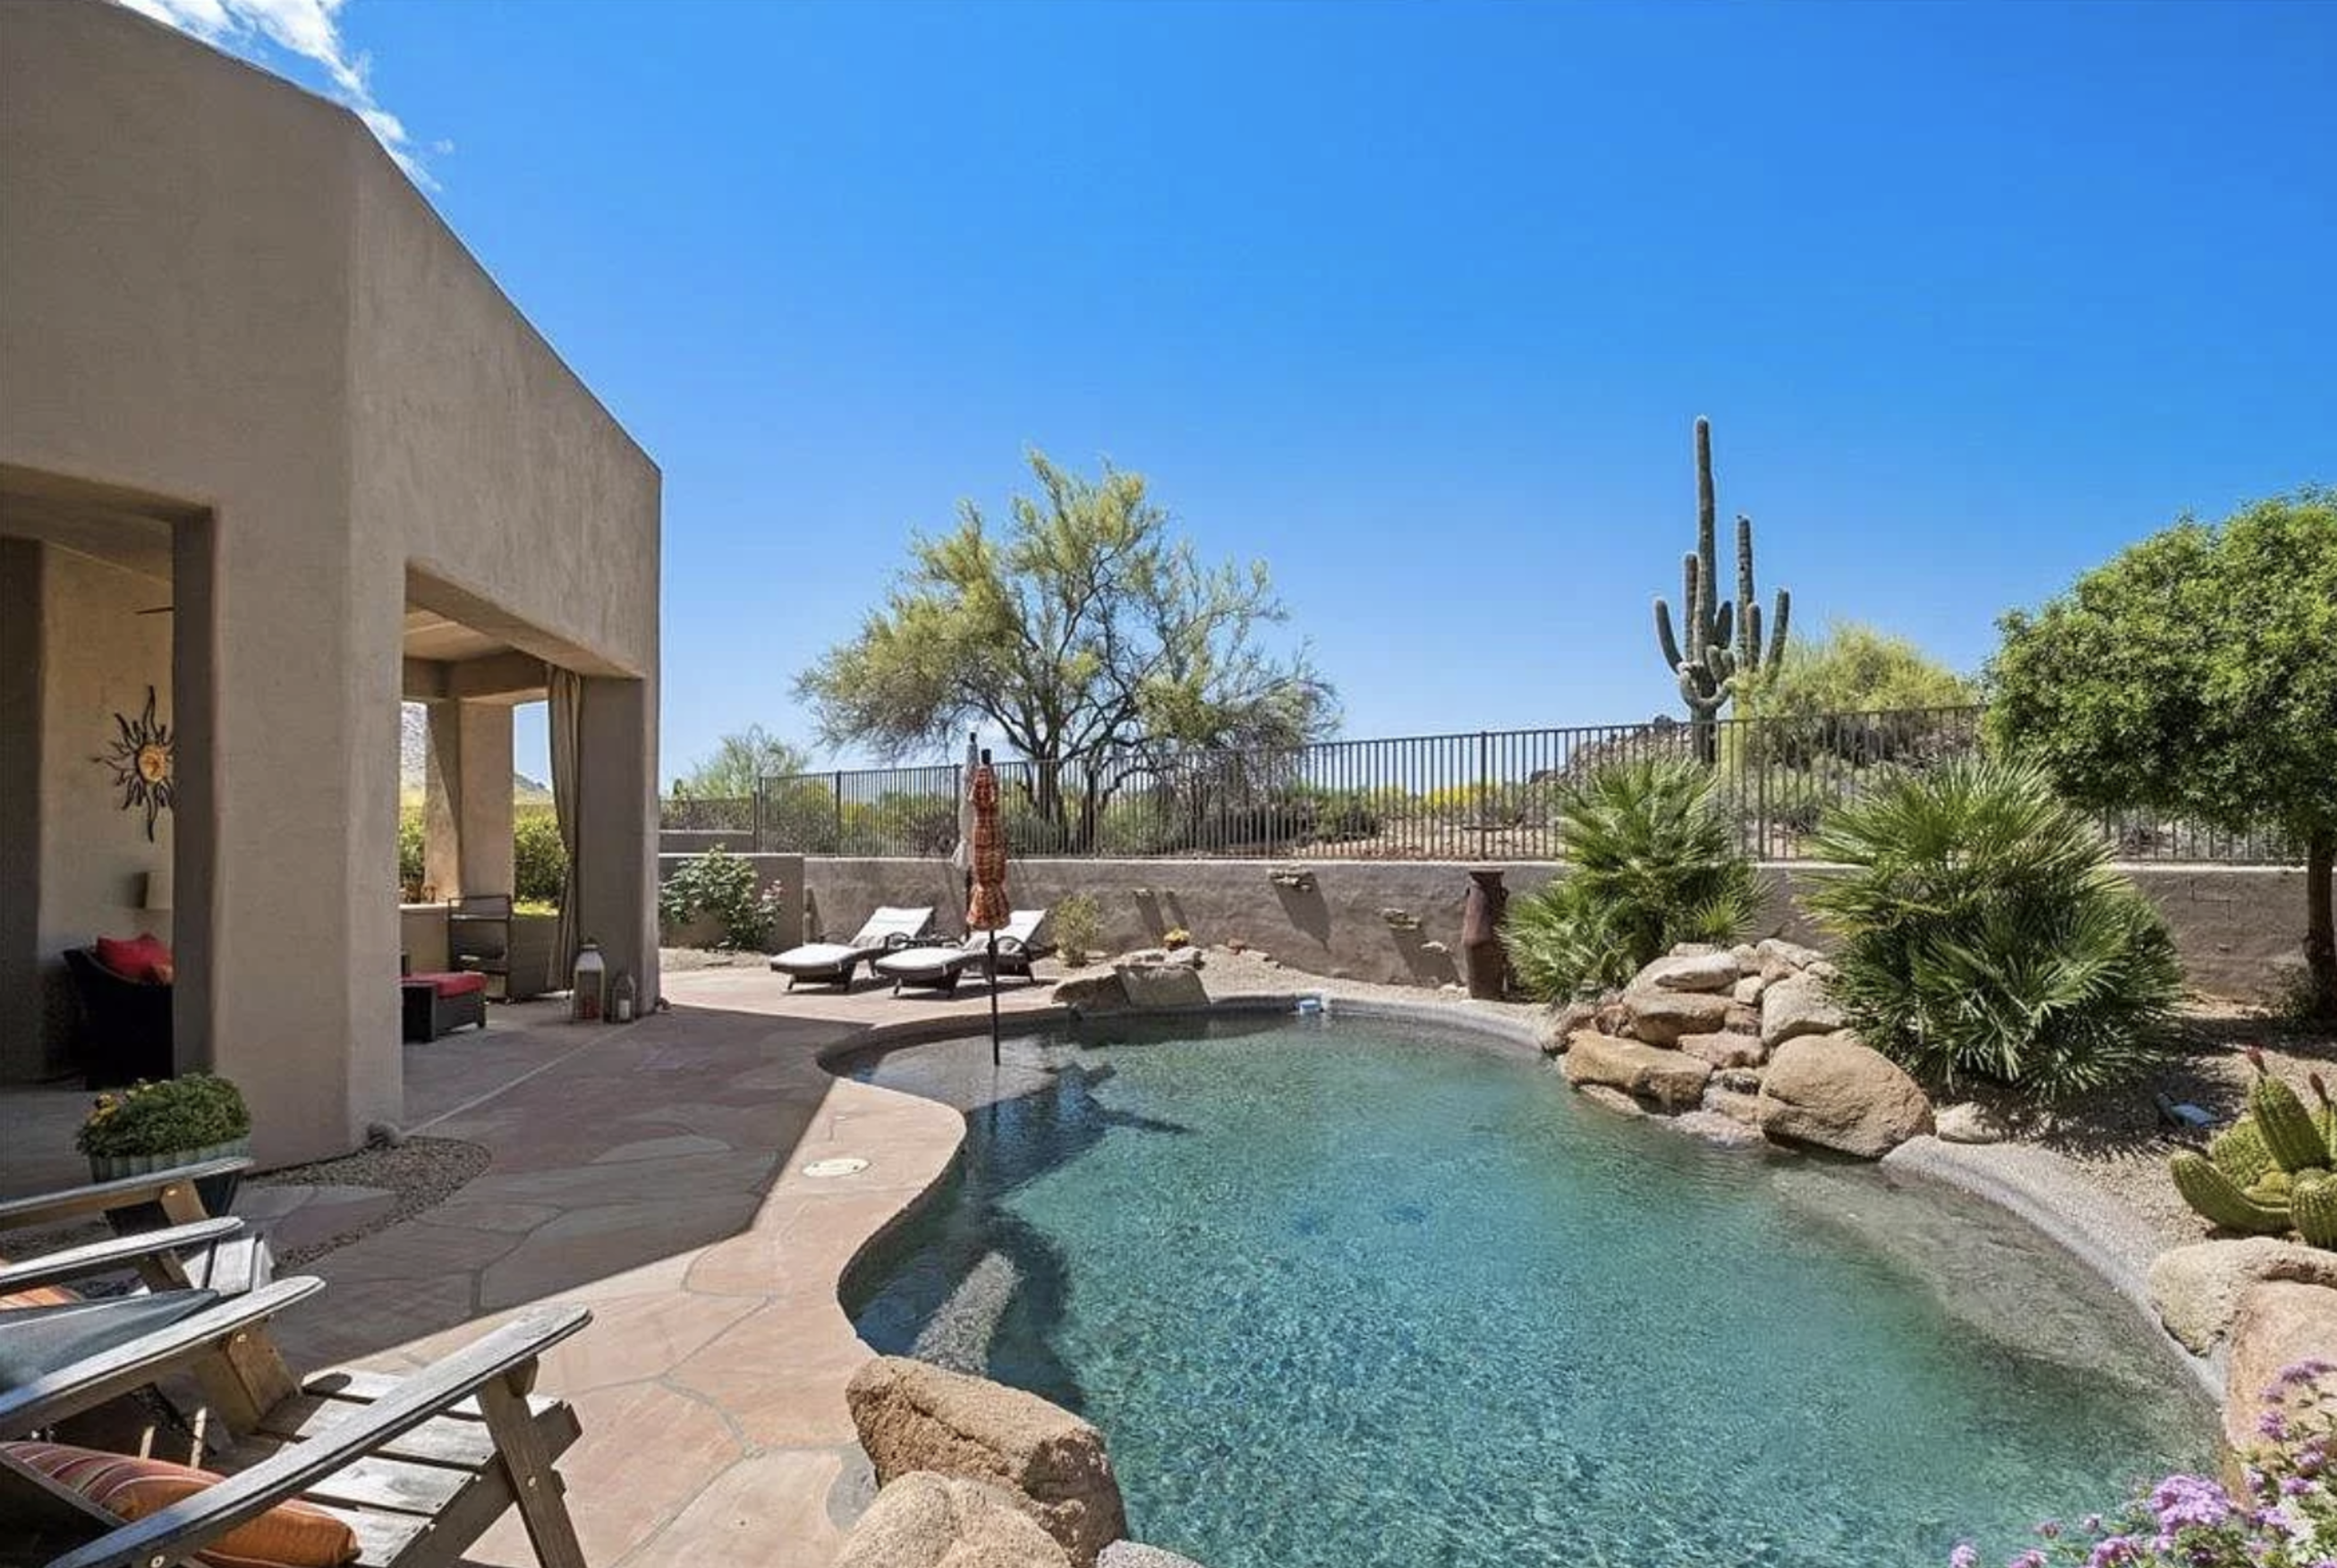 27892 108th Way, Scottsdale $1,100,000 SOLD BY CYN!